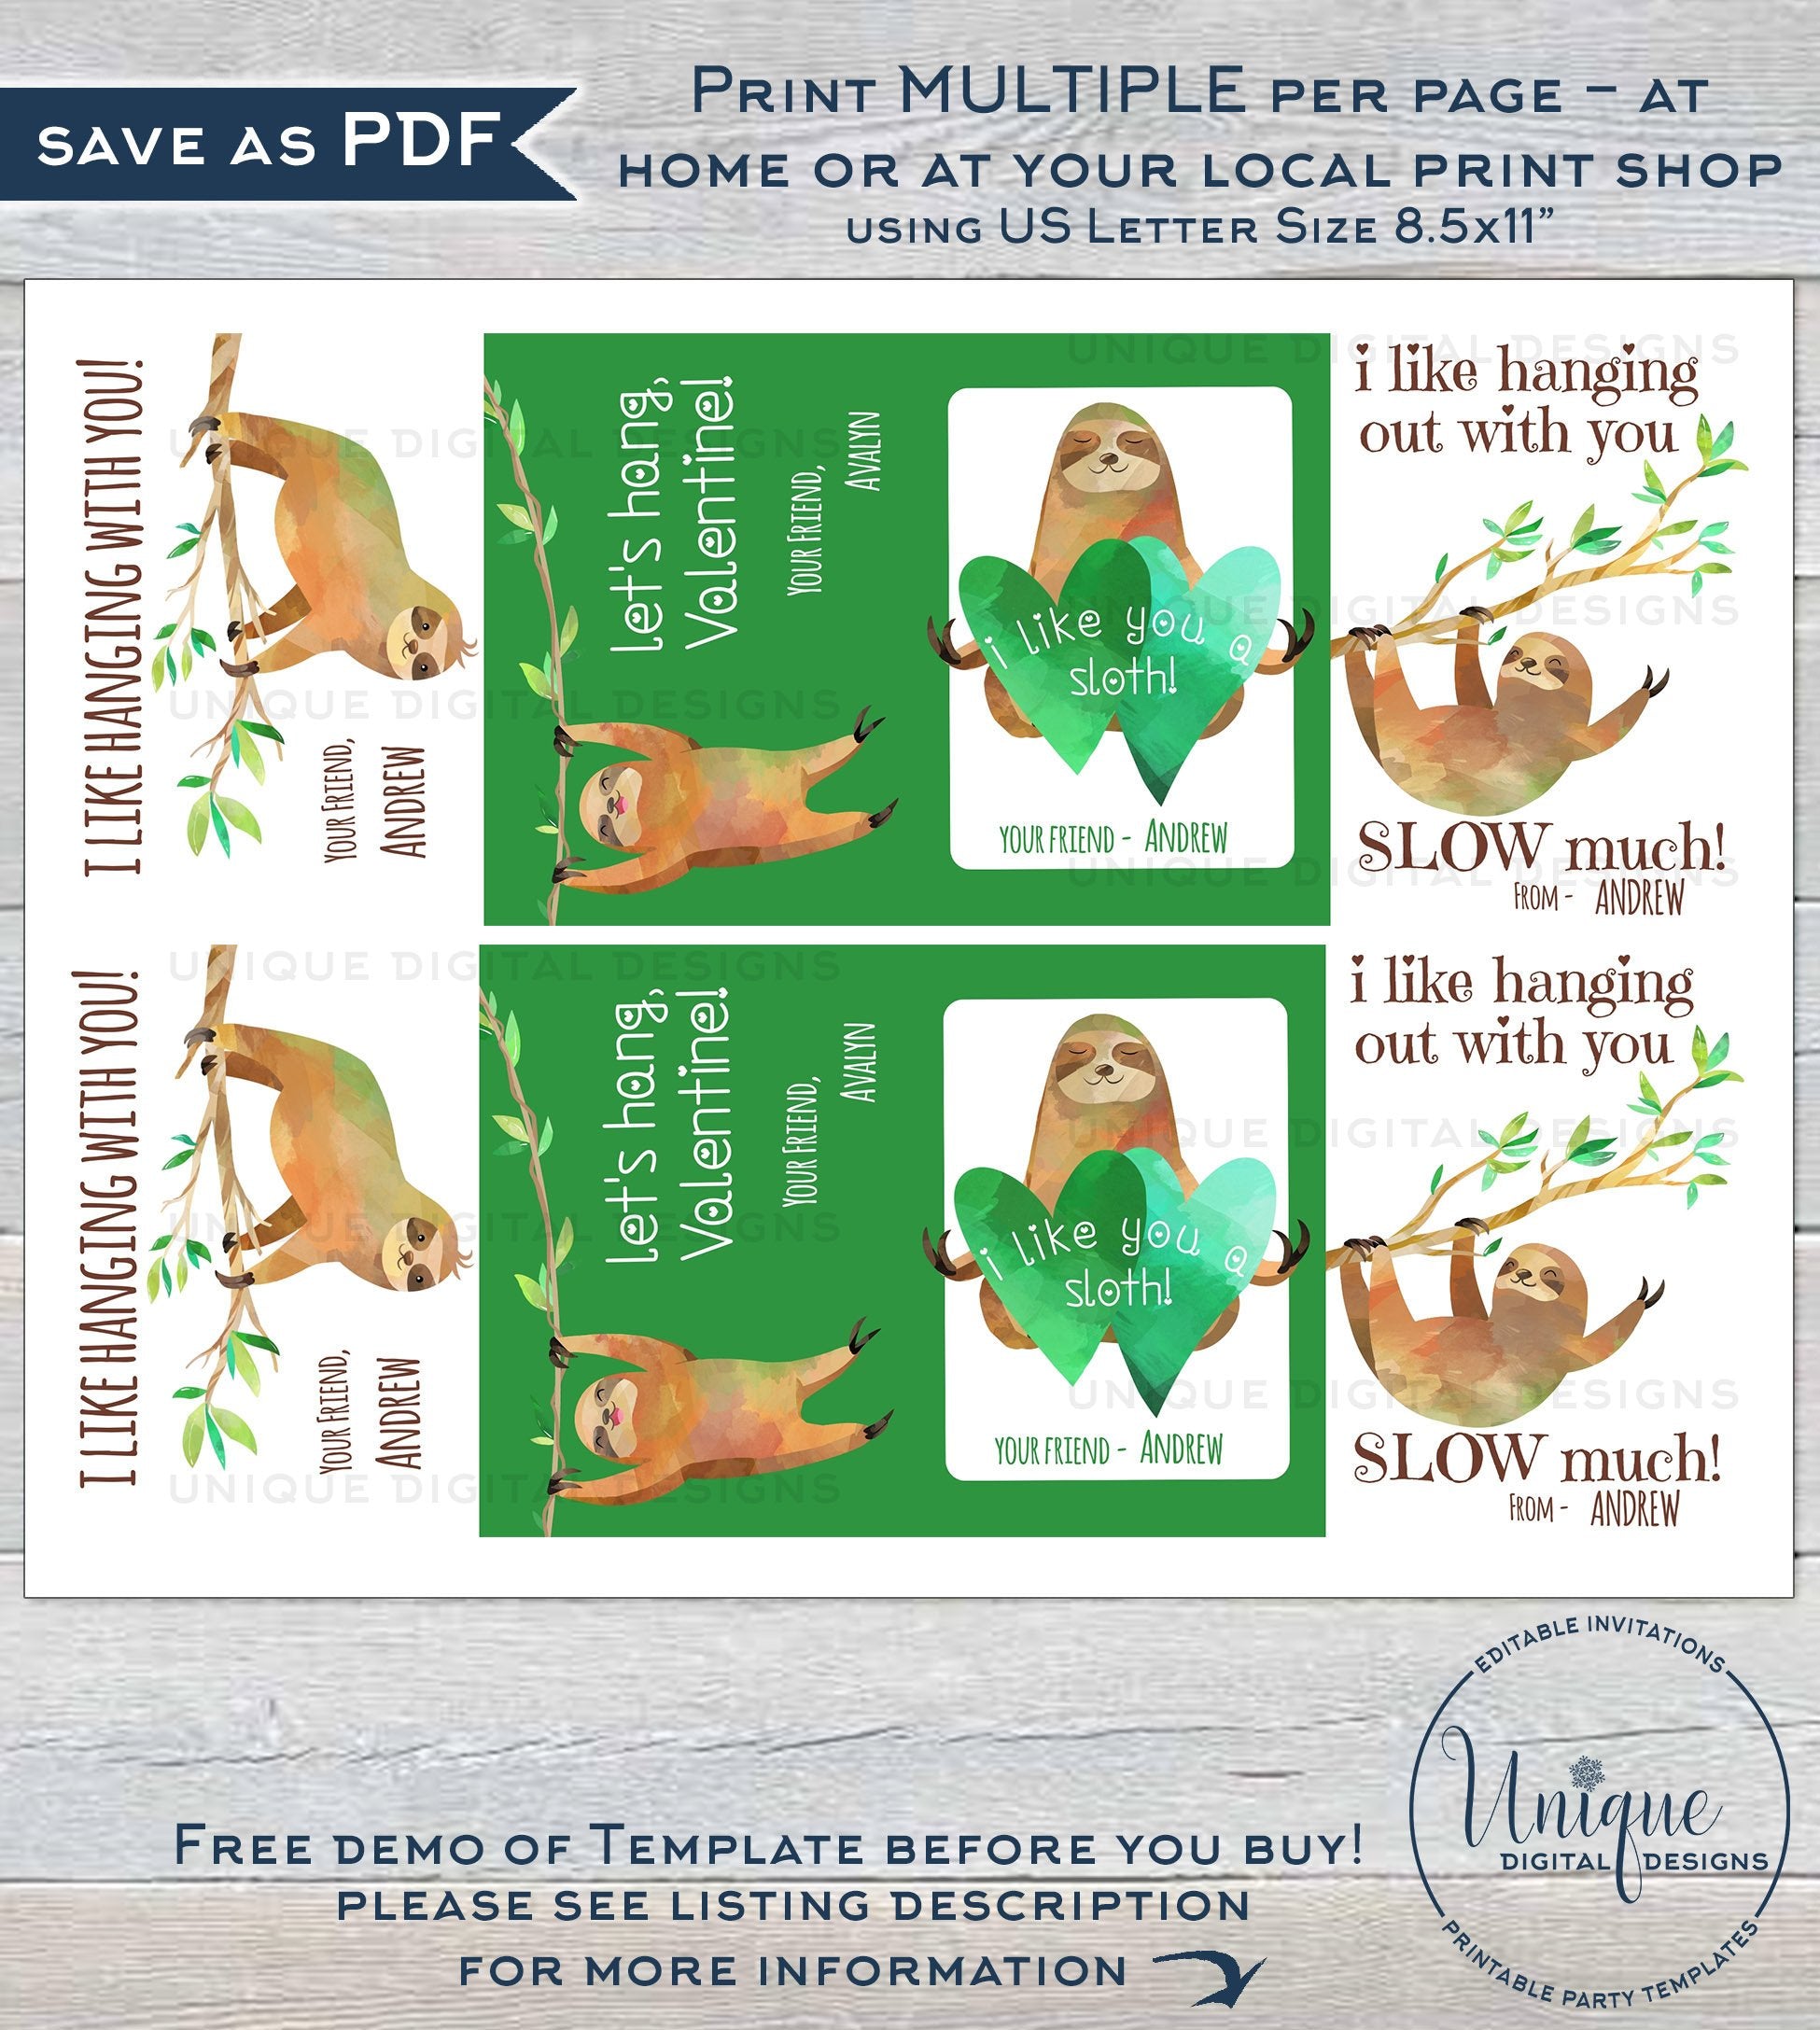 Sloth Printable Valentine's Day Cards for Students Class Exchange